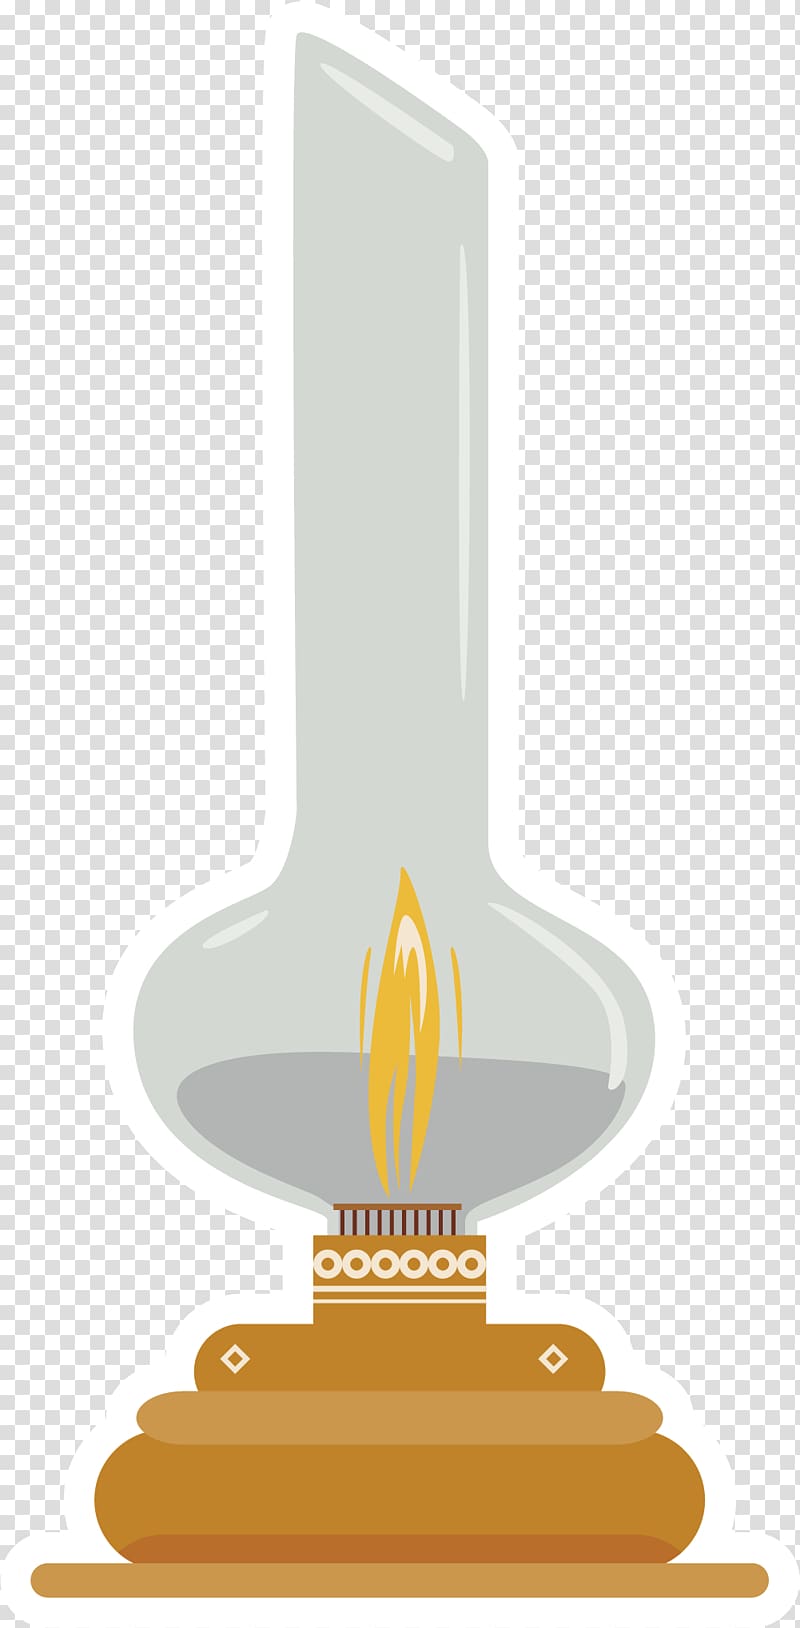 Oil lamp Light fixture Electric light, Simple oil lamp for Eid UL Fitr transparent background PNG clipart